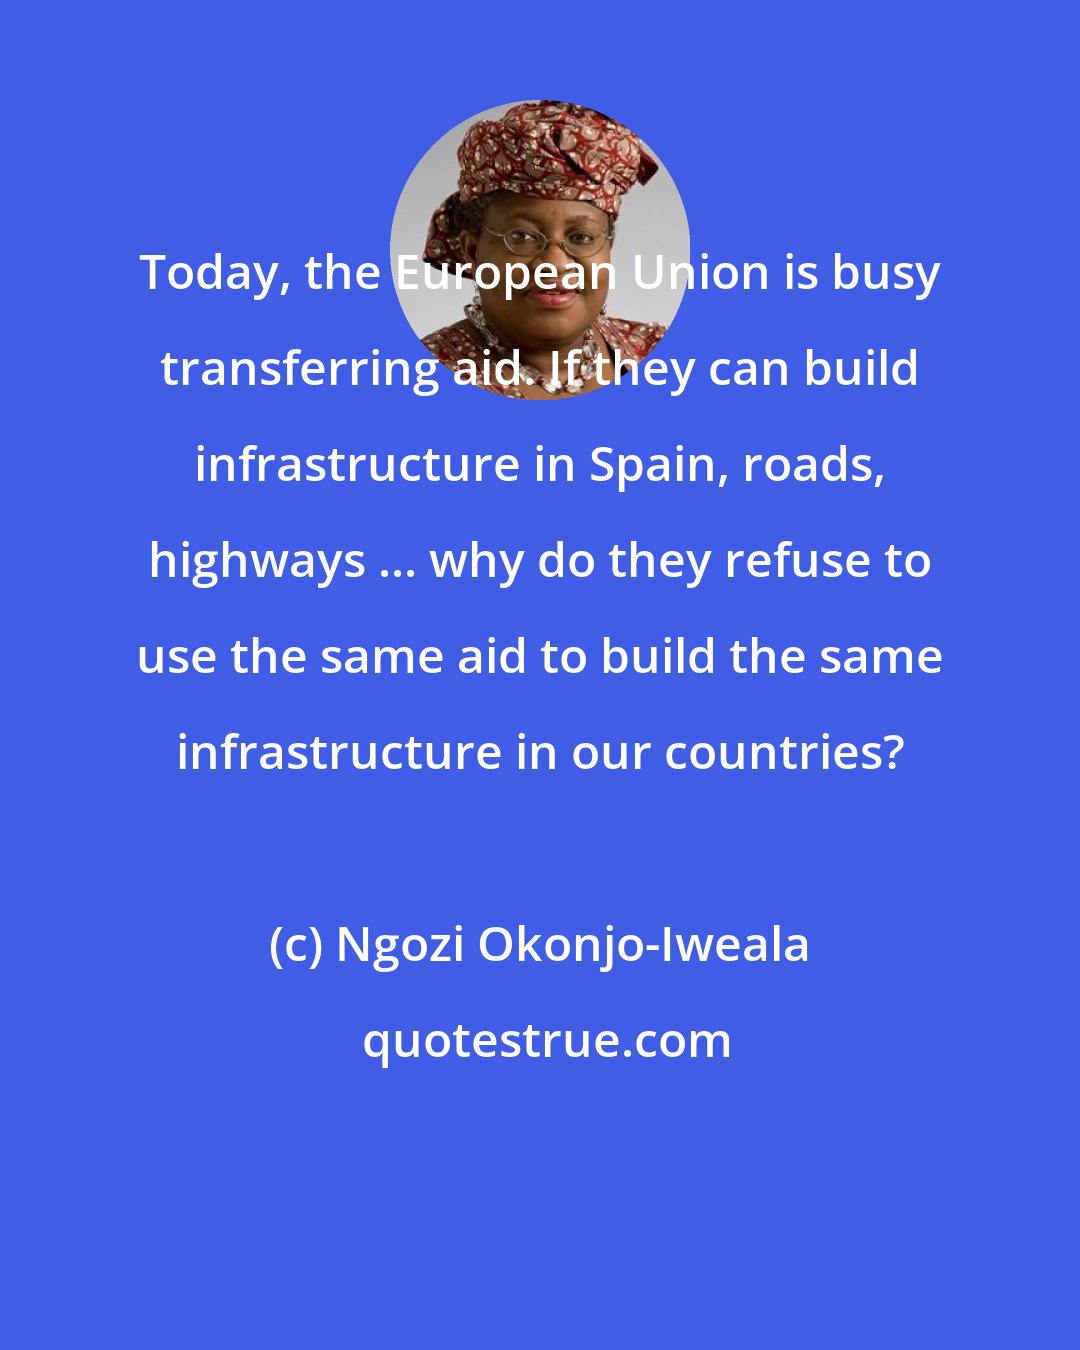 Ngozi Okonjo-Iweala: Today, the European Union is busy transferring aid. If they can build infrastructure in Spain, roads, highways ... why do they refuse to use the same aid to build the same infrastructure in our countries?